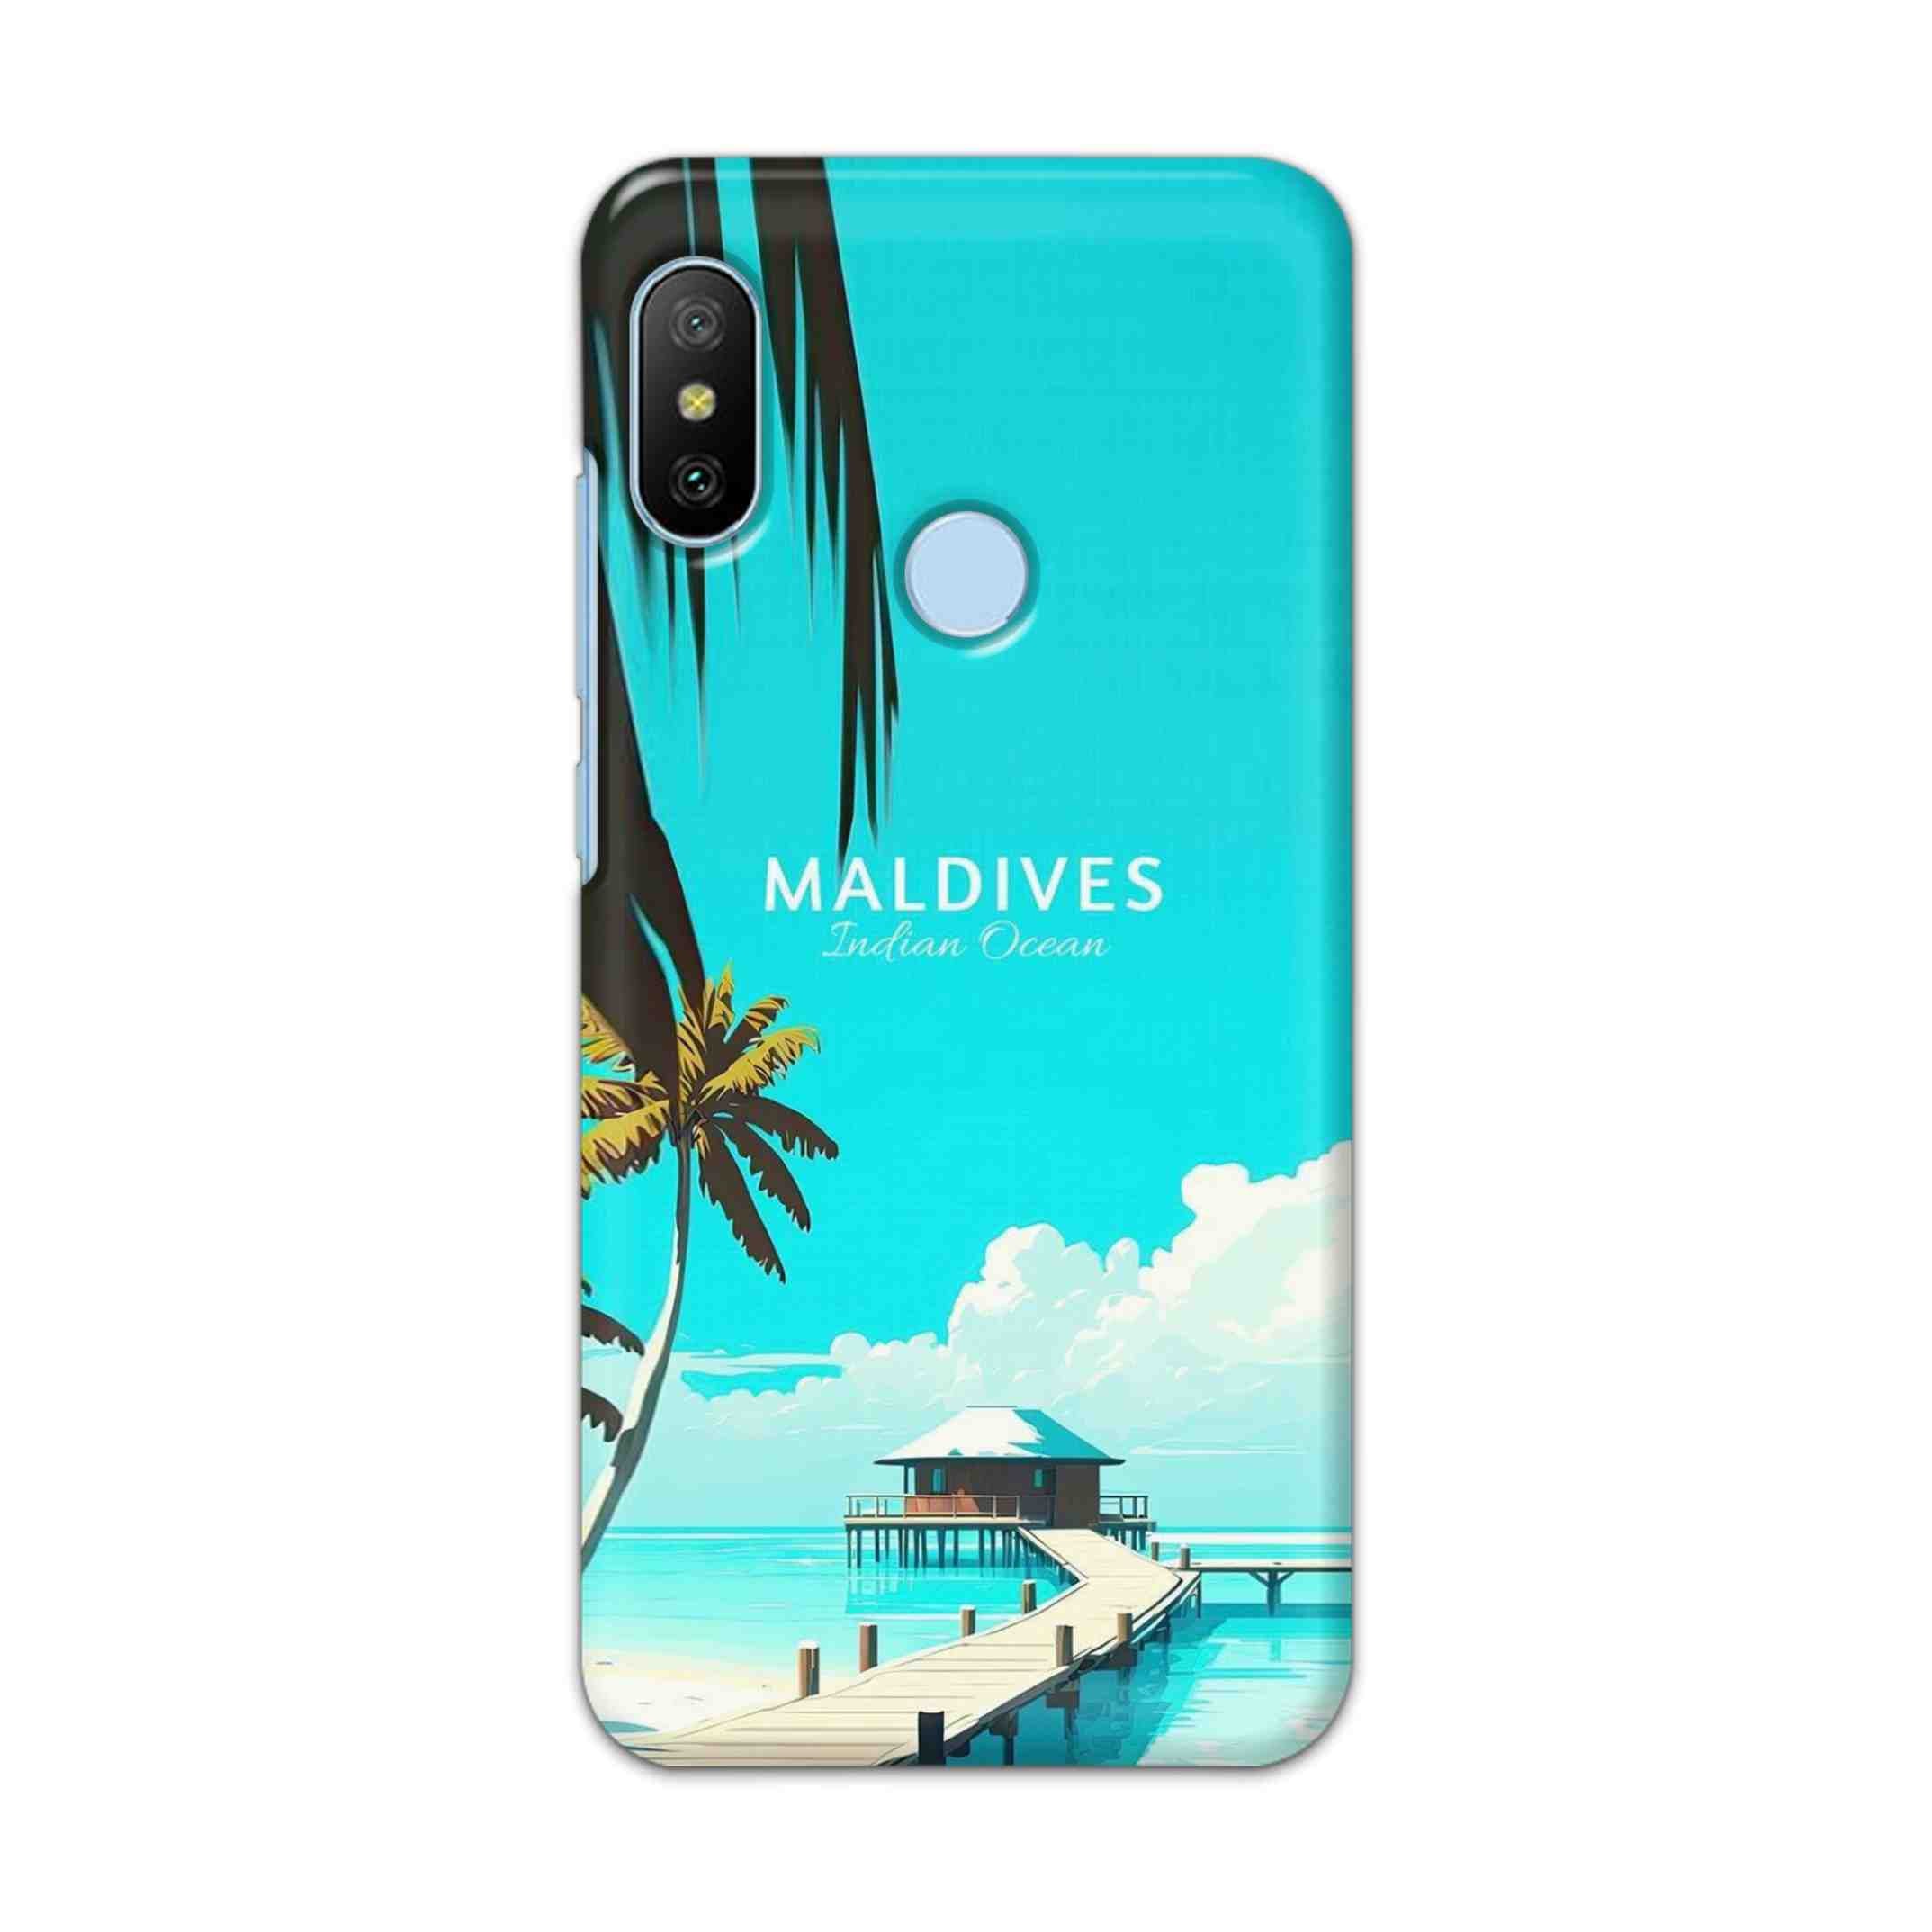 Buy Maldives Hard Back Mobile Phone Case/Cover For Xiaomi A2 / 6X Online